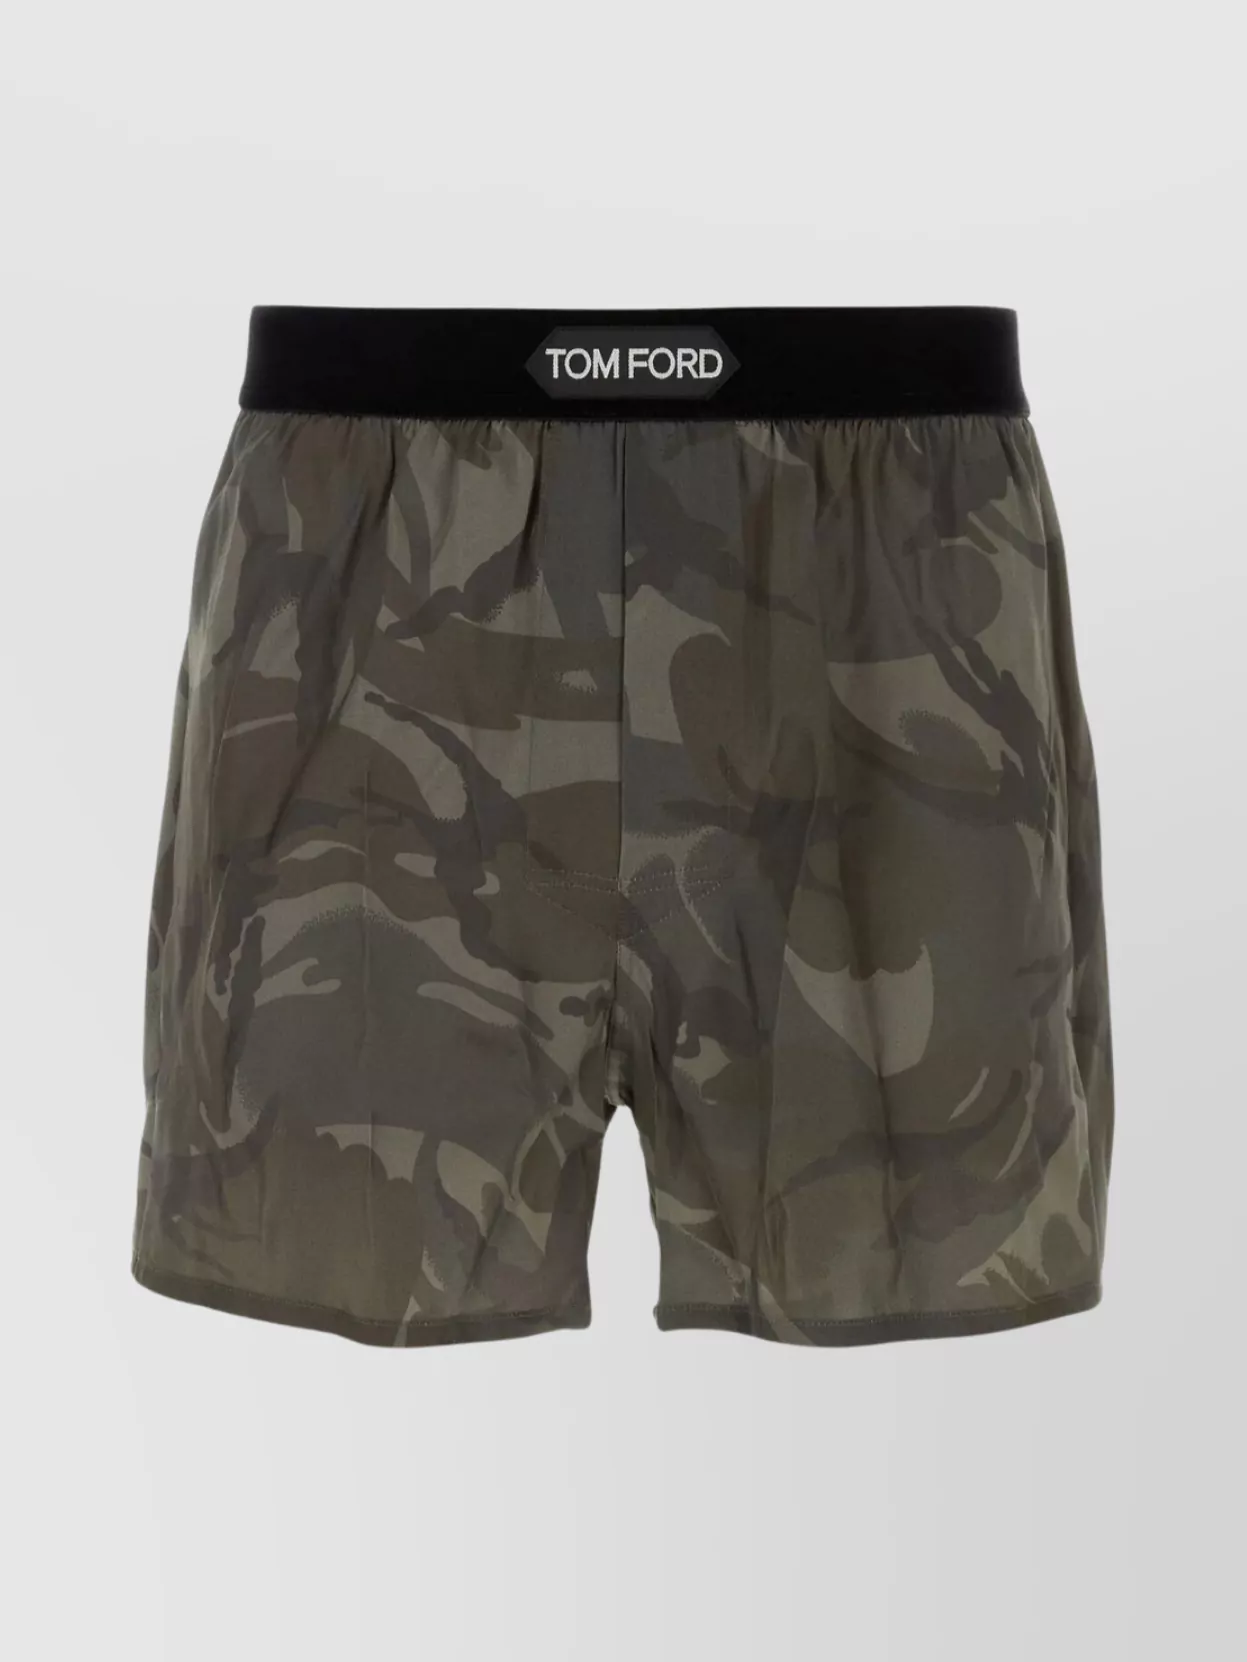 Shop Tom Ford Silk Boxer Featuring Patterned Elastic Waistband